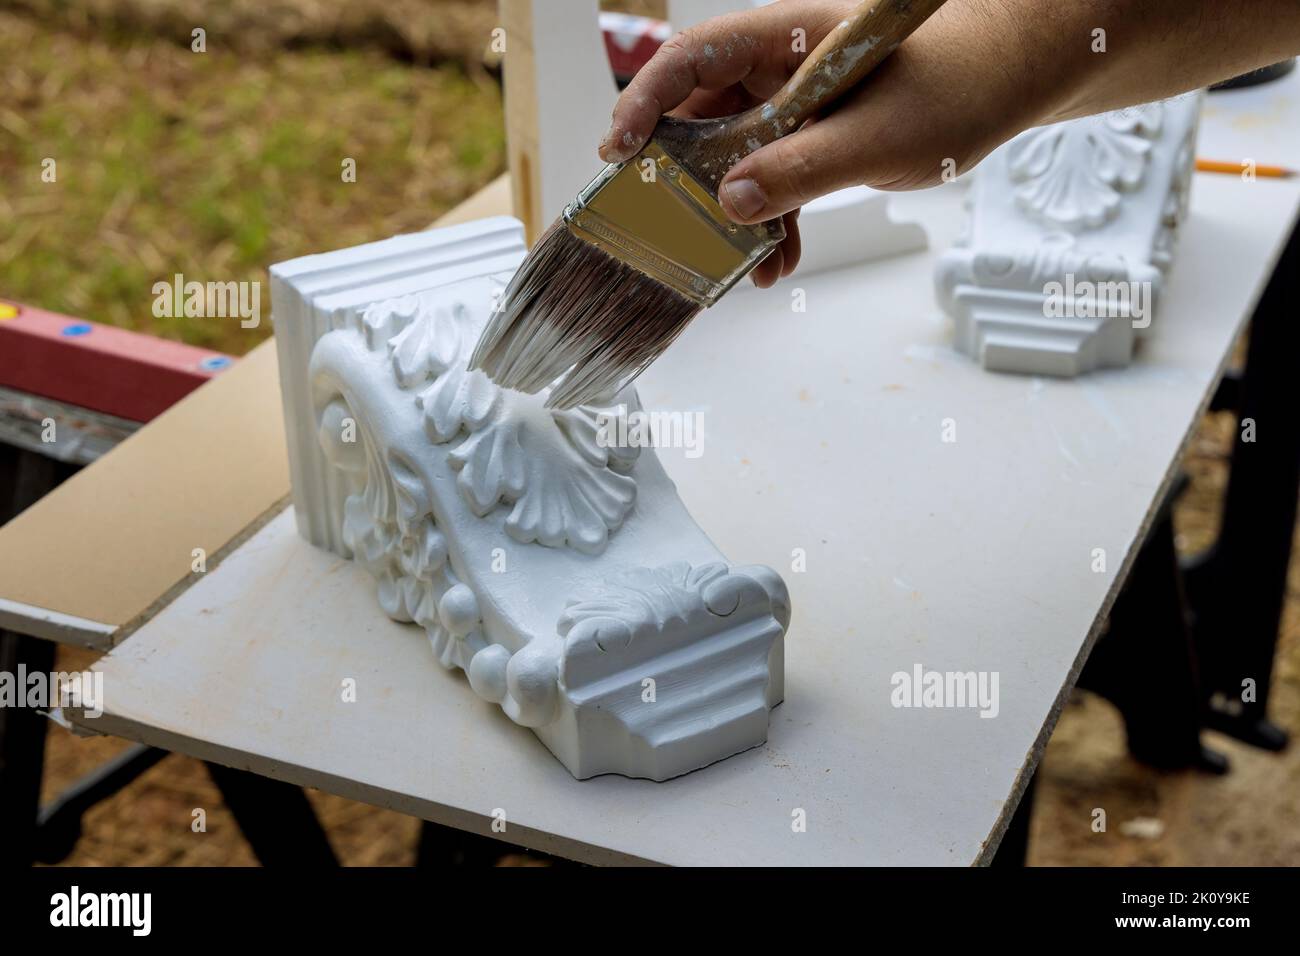 Painting wooden corbels for the kitchen island with worker is using paintbrush Stock Photo